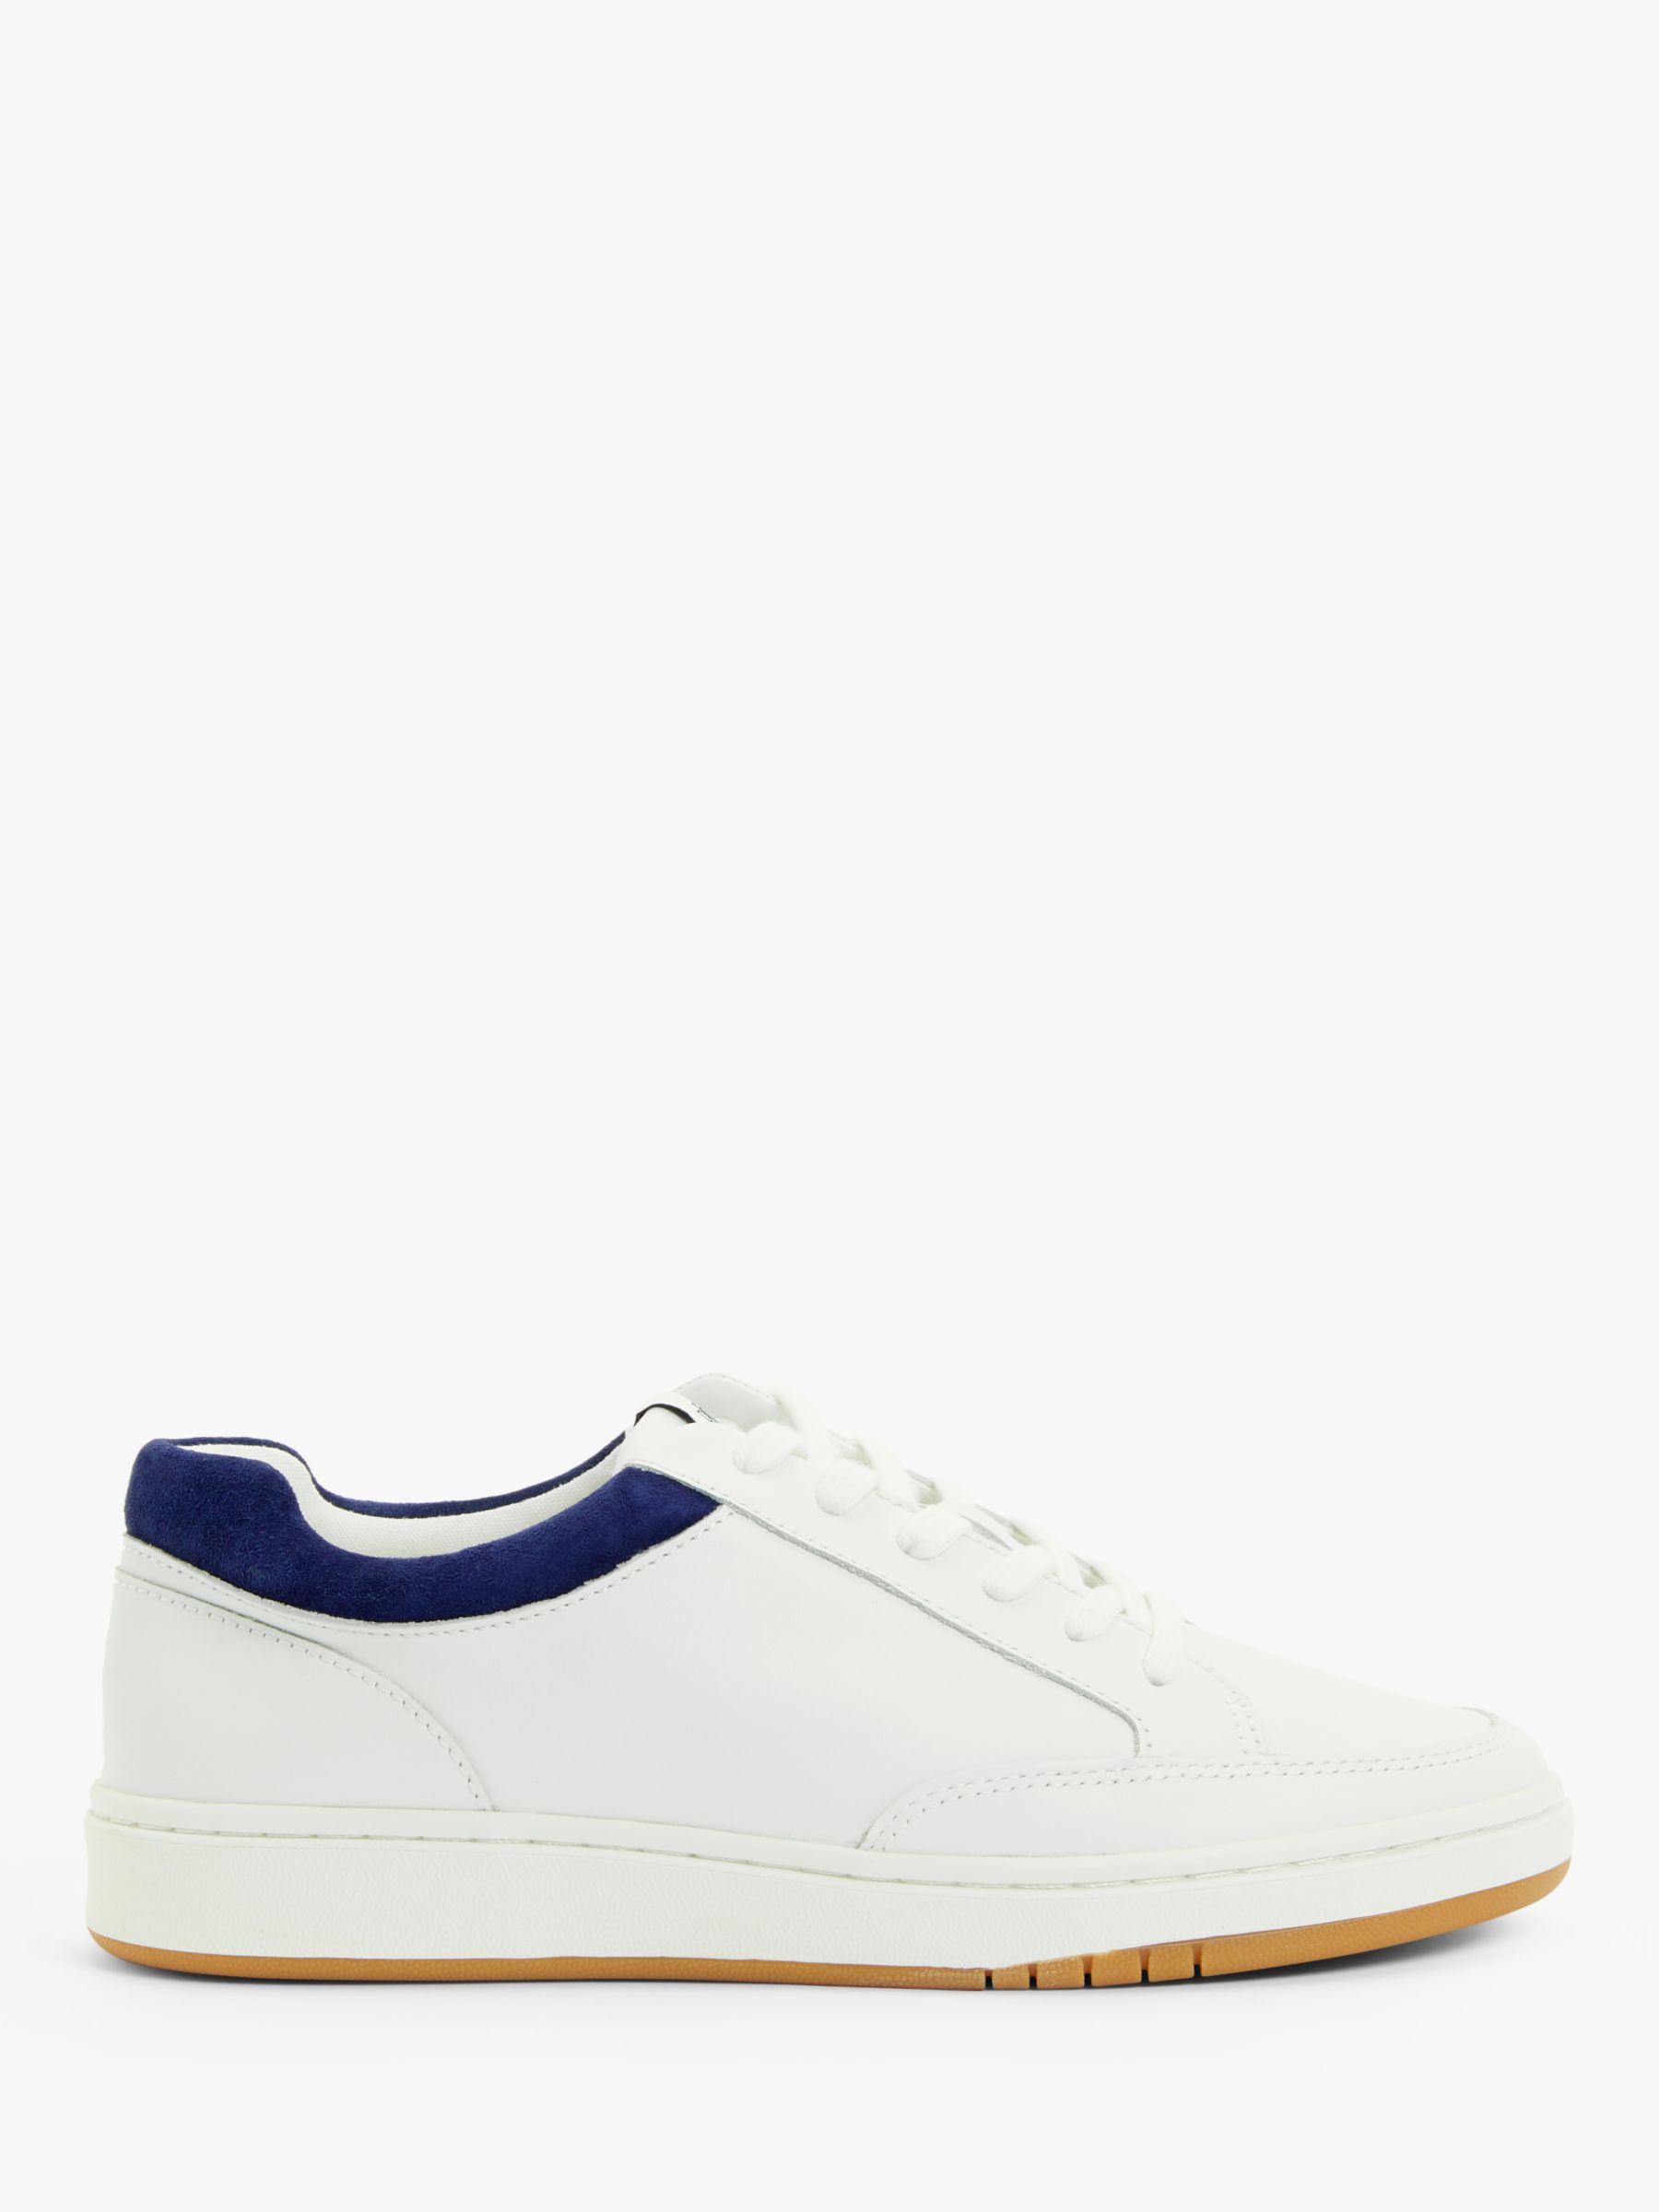 Ralph Lauren Hailey Leather Lace Up Trainers, White